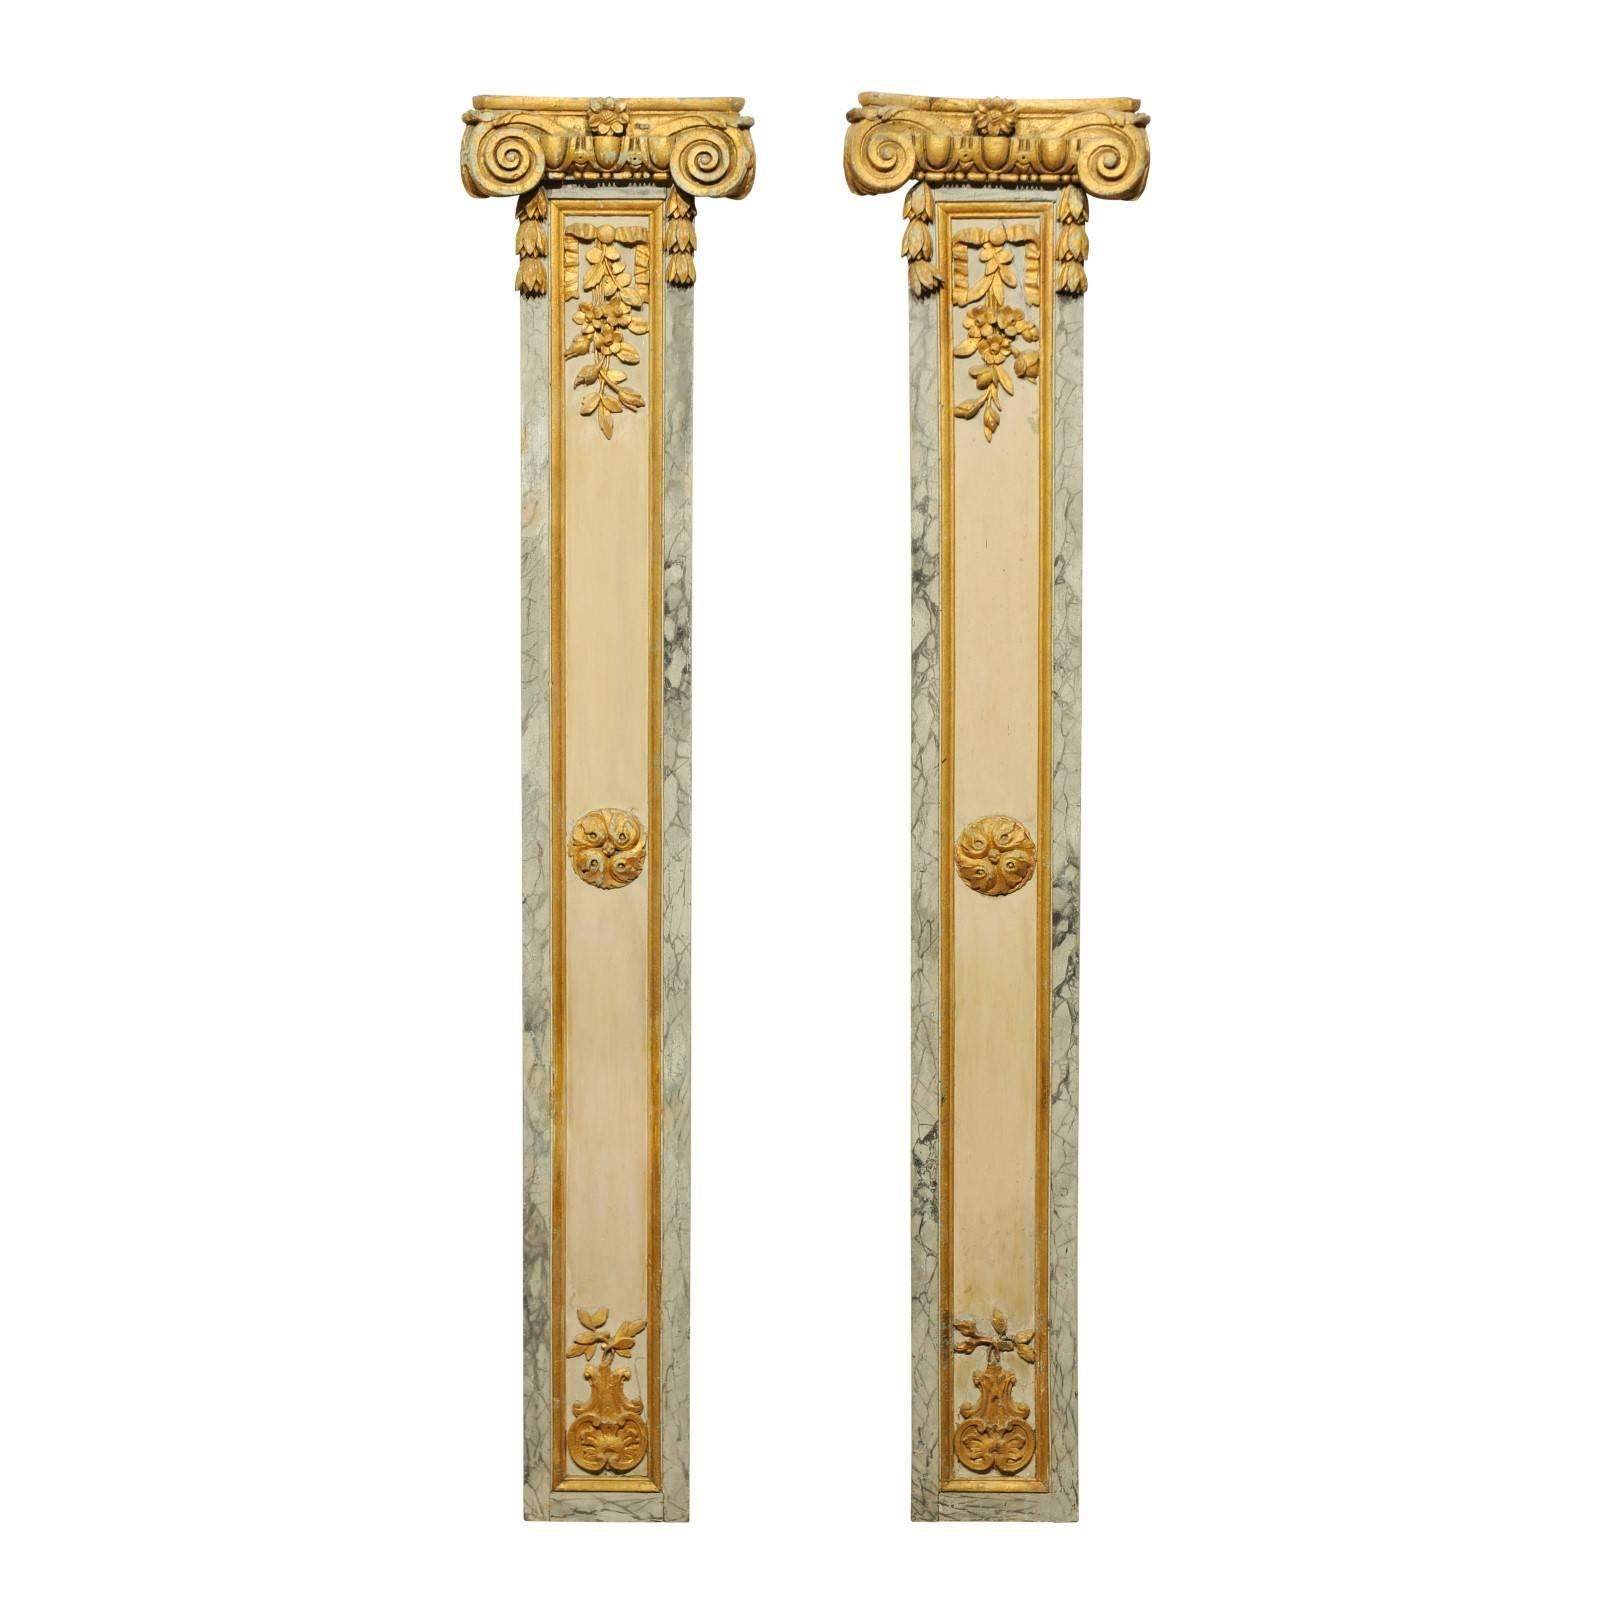 Pair of 18th Century French Louis XVI Decorative Pilasters with Ionic Capitals